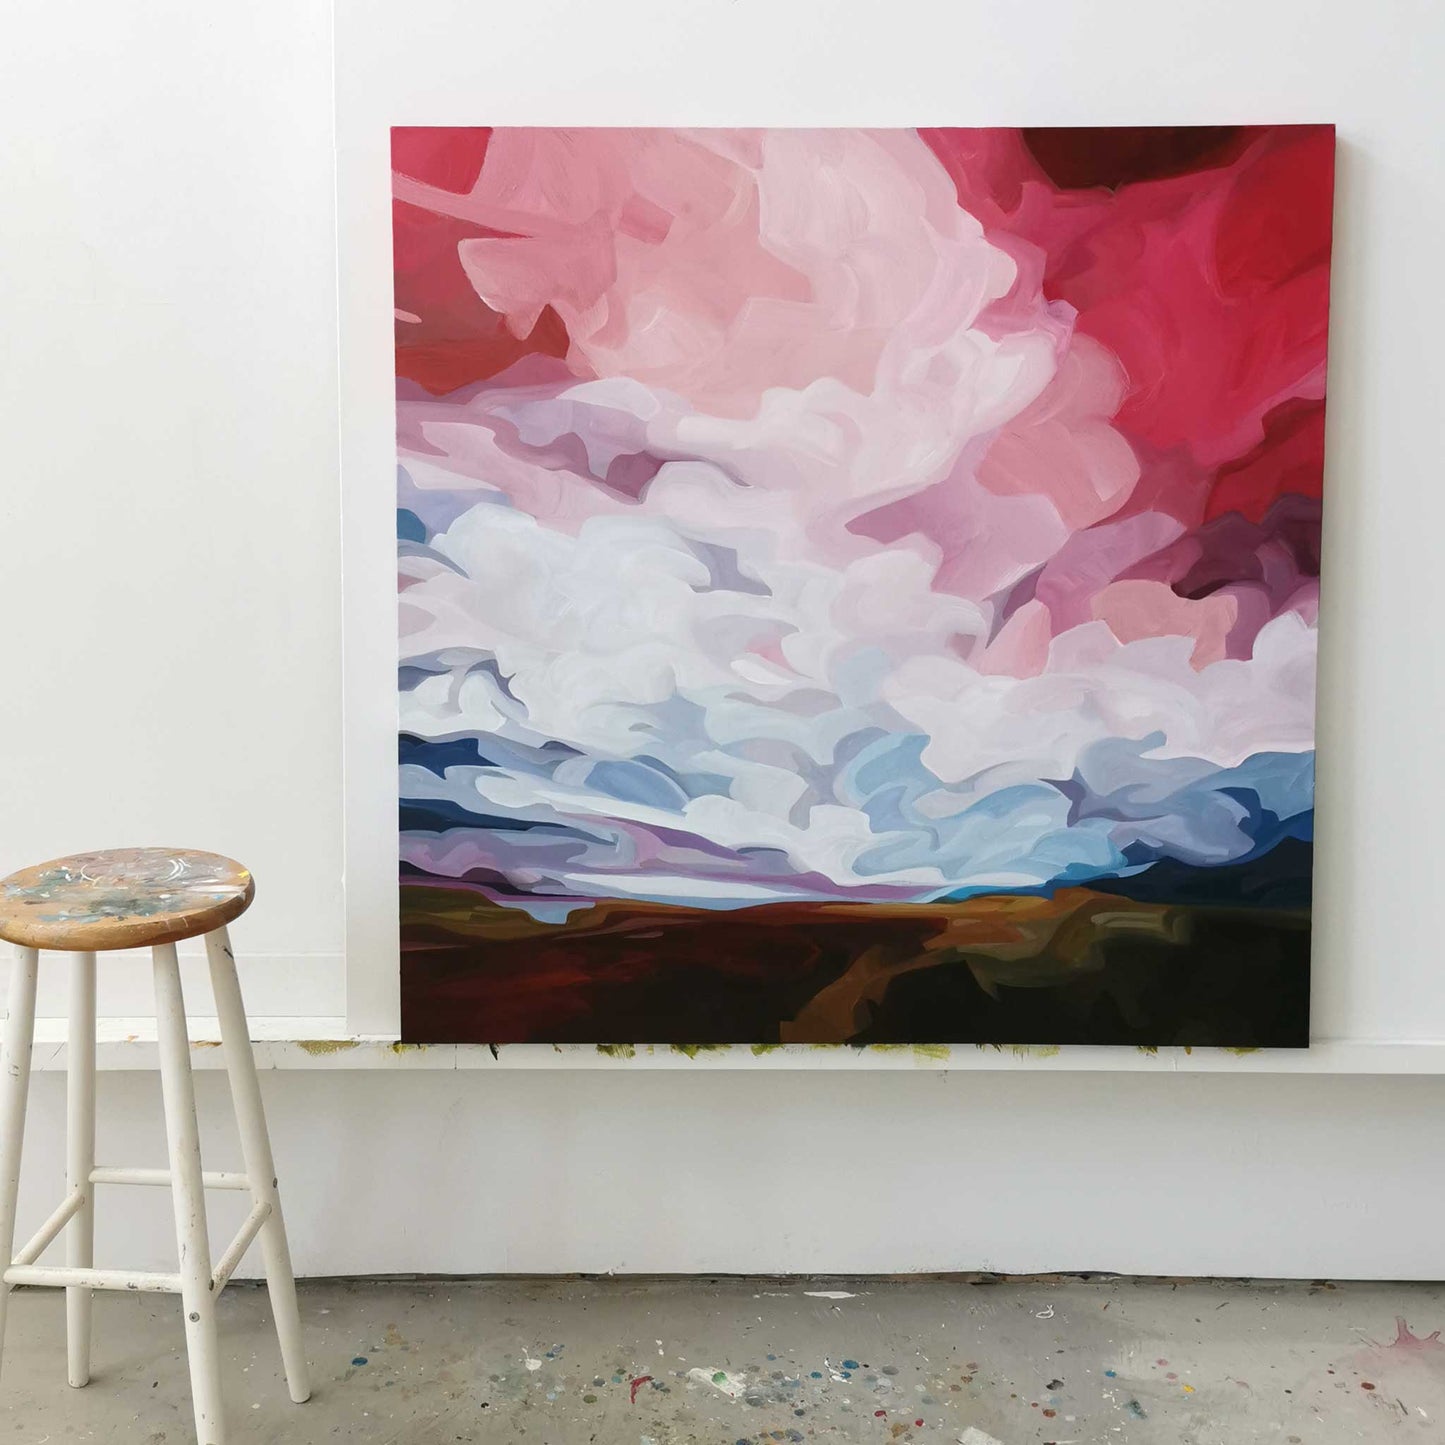 An abstract acrylic sky painting in a dramatic palette of bold colous. A large original cloud painting on canvas by Canadian artist Susannah Bleasby